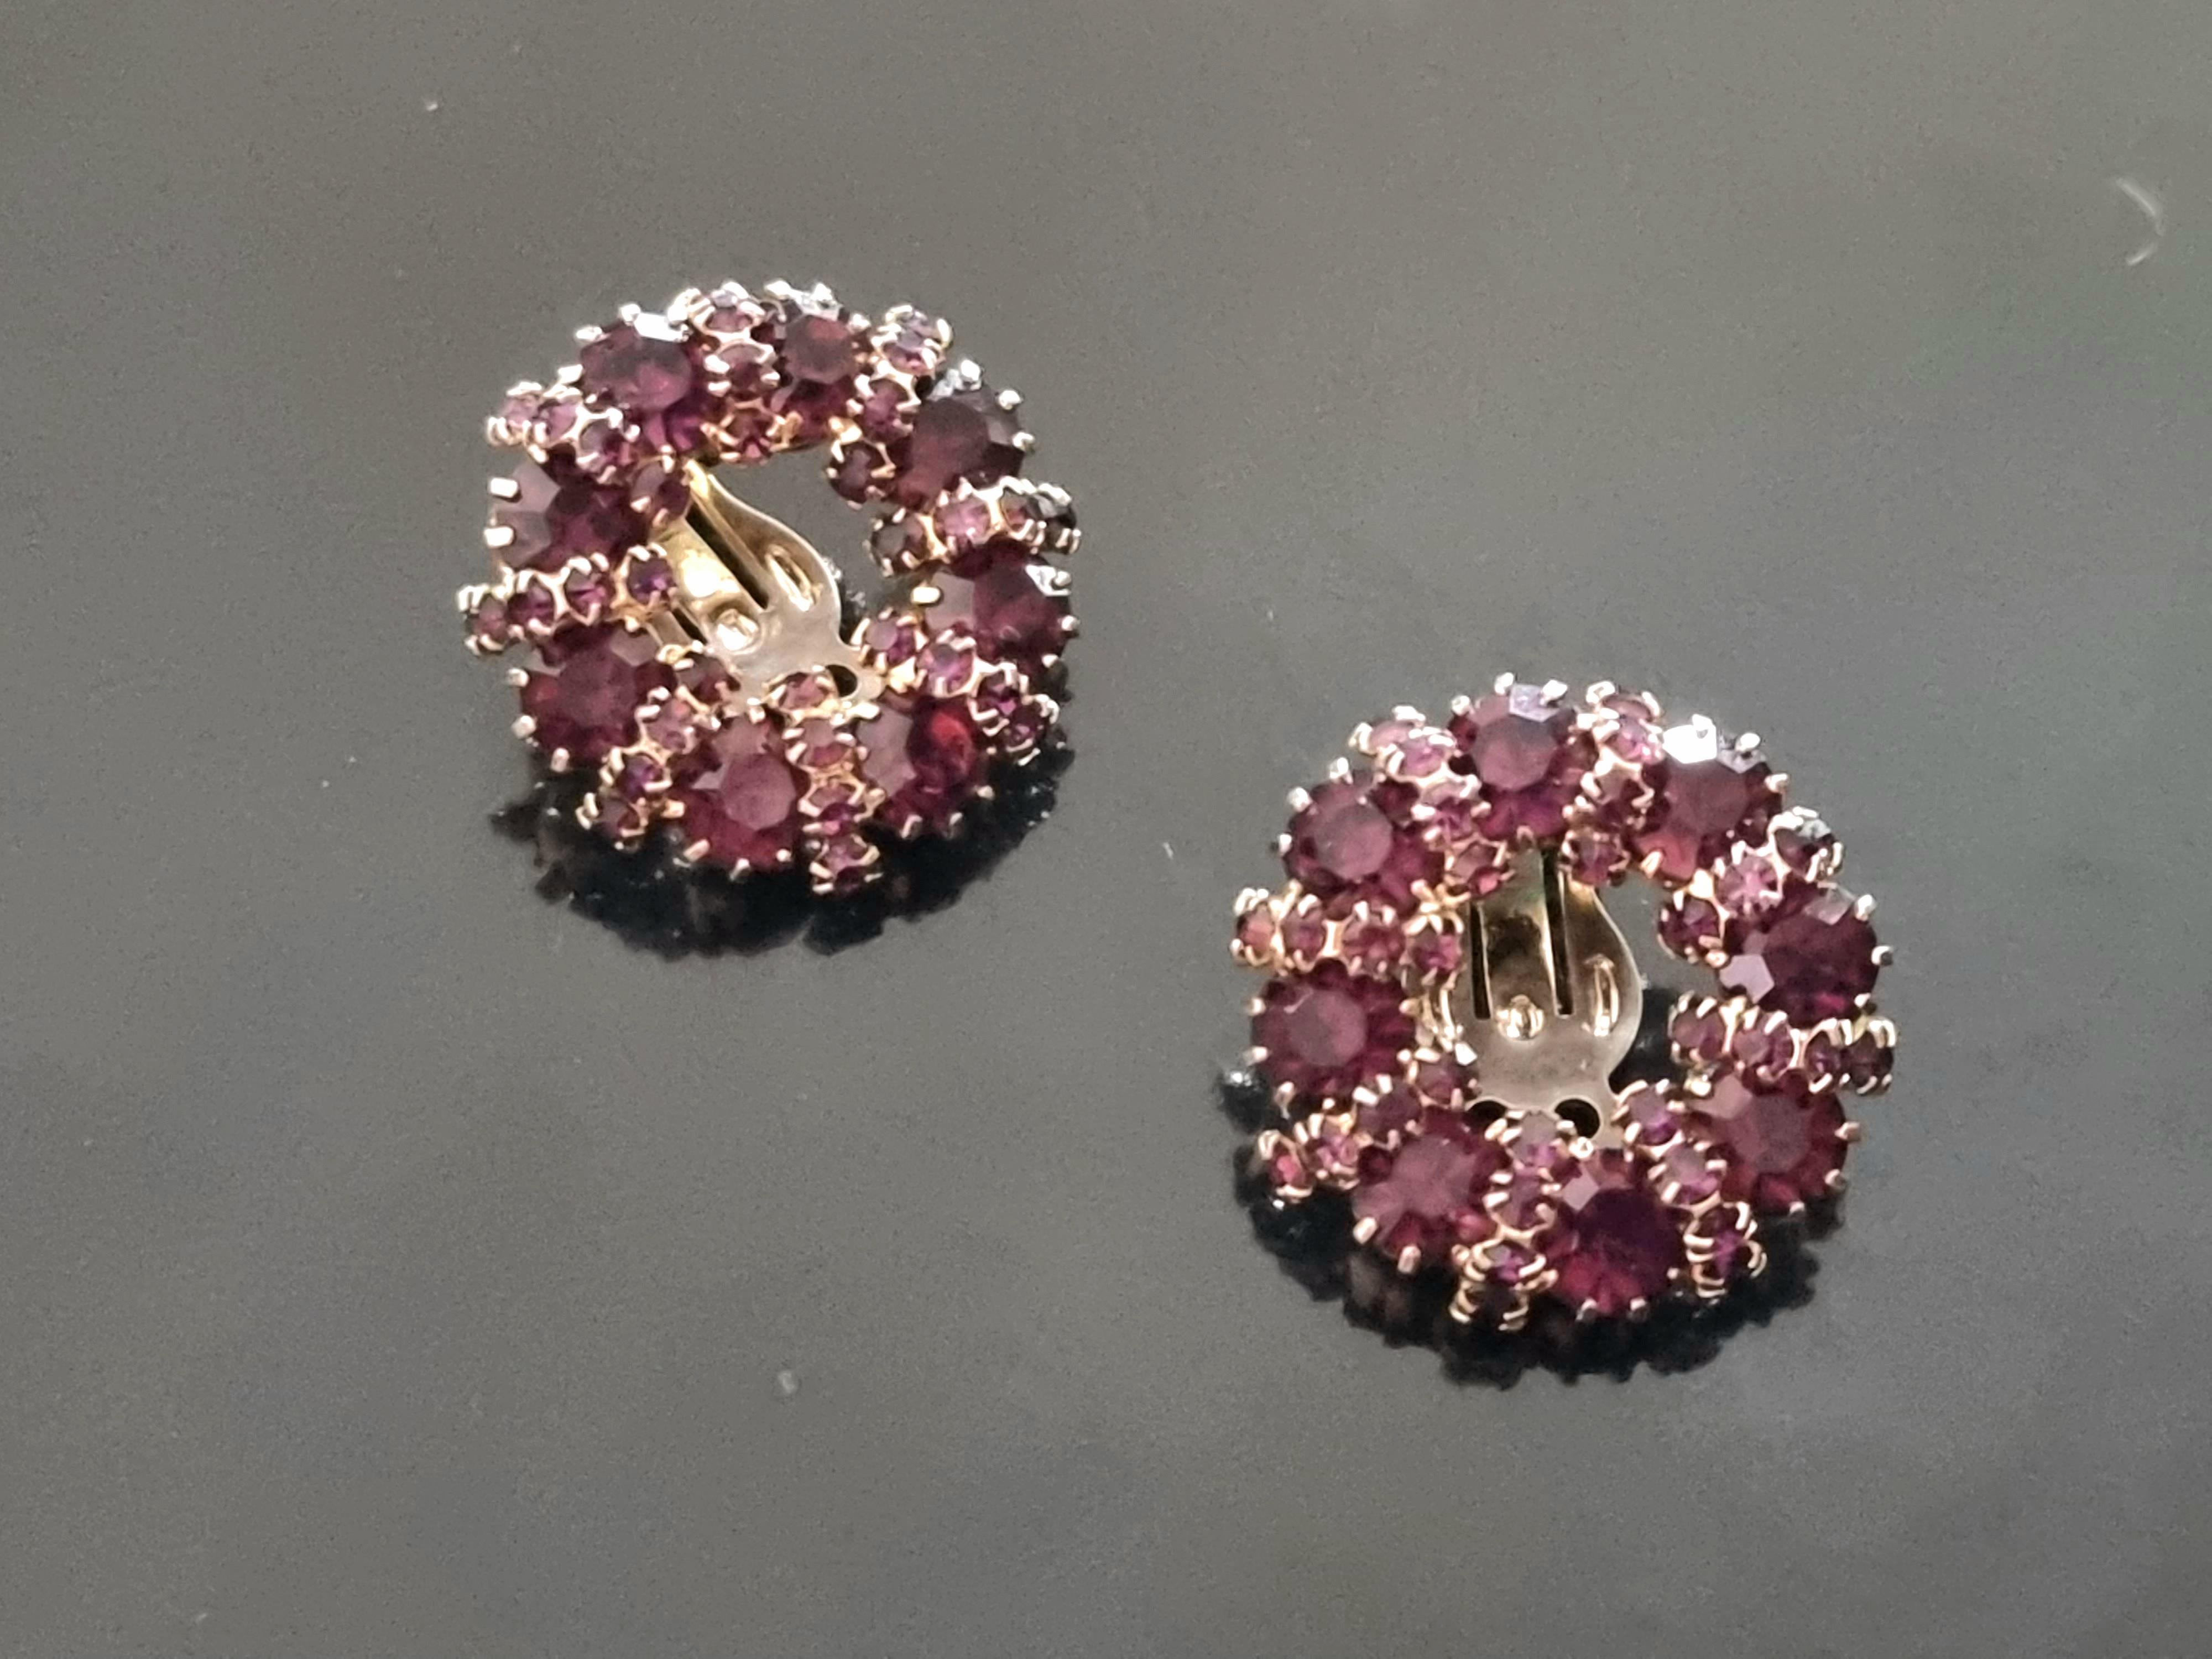 Clip-on EARRINGS,
vintage from the 50s,
signed WEISS,
diameter 2.5 cm, weight of one earring 6.3 g,
good condition.


Albert Weiss is a former Coro company craftsman, He opened his own business in New York in 1942. He is well known for his use of